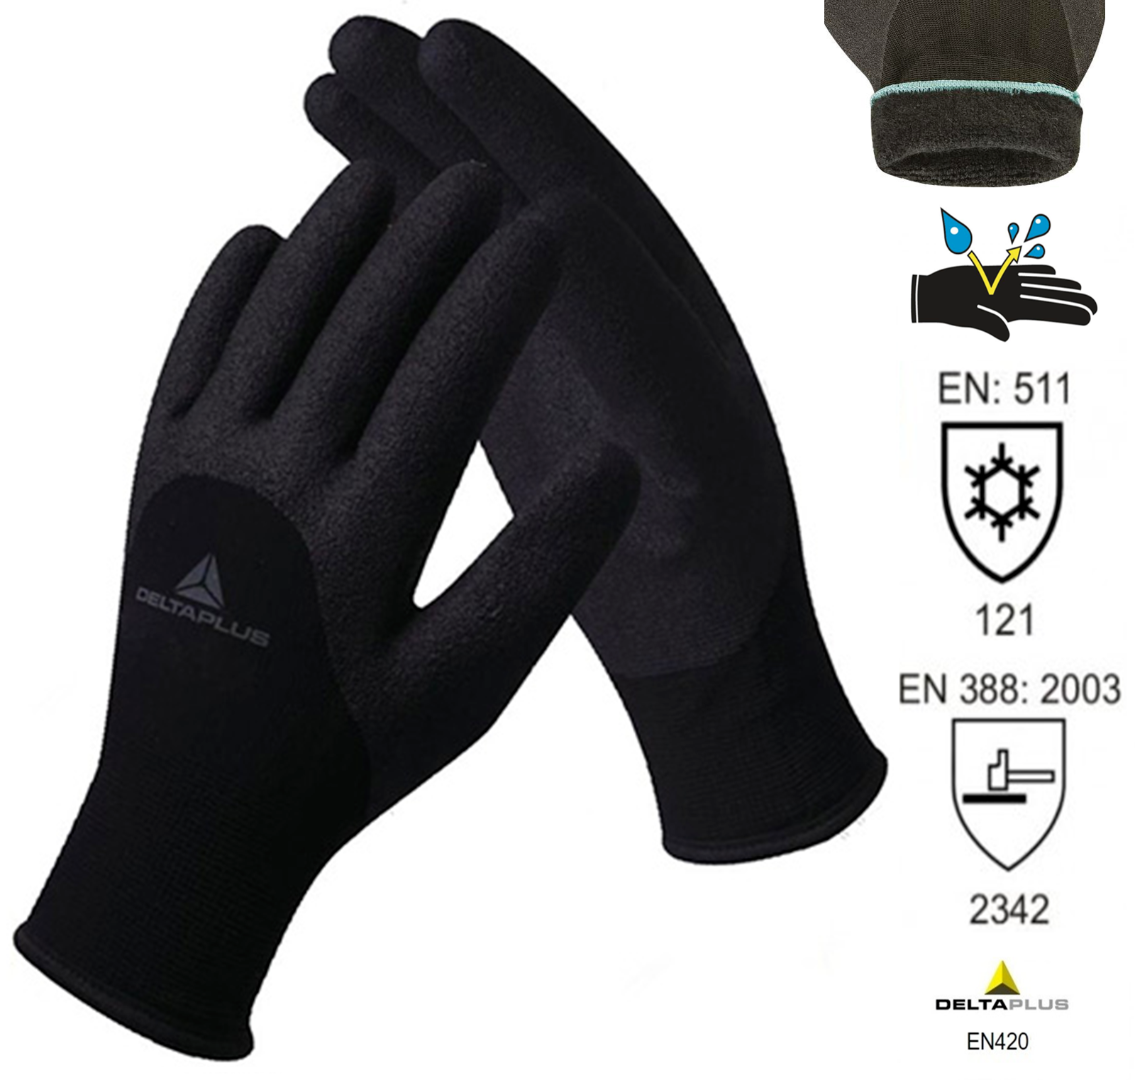 6 Pairs of Delta Plus HERCULE VV750 Safety Work Gloves Black with Nitrile Foam 